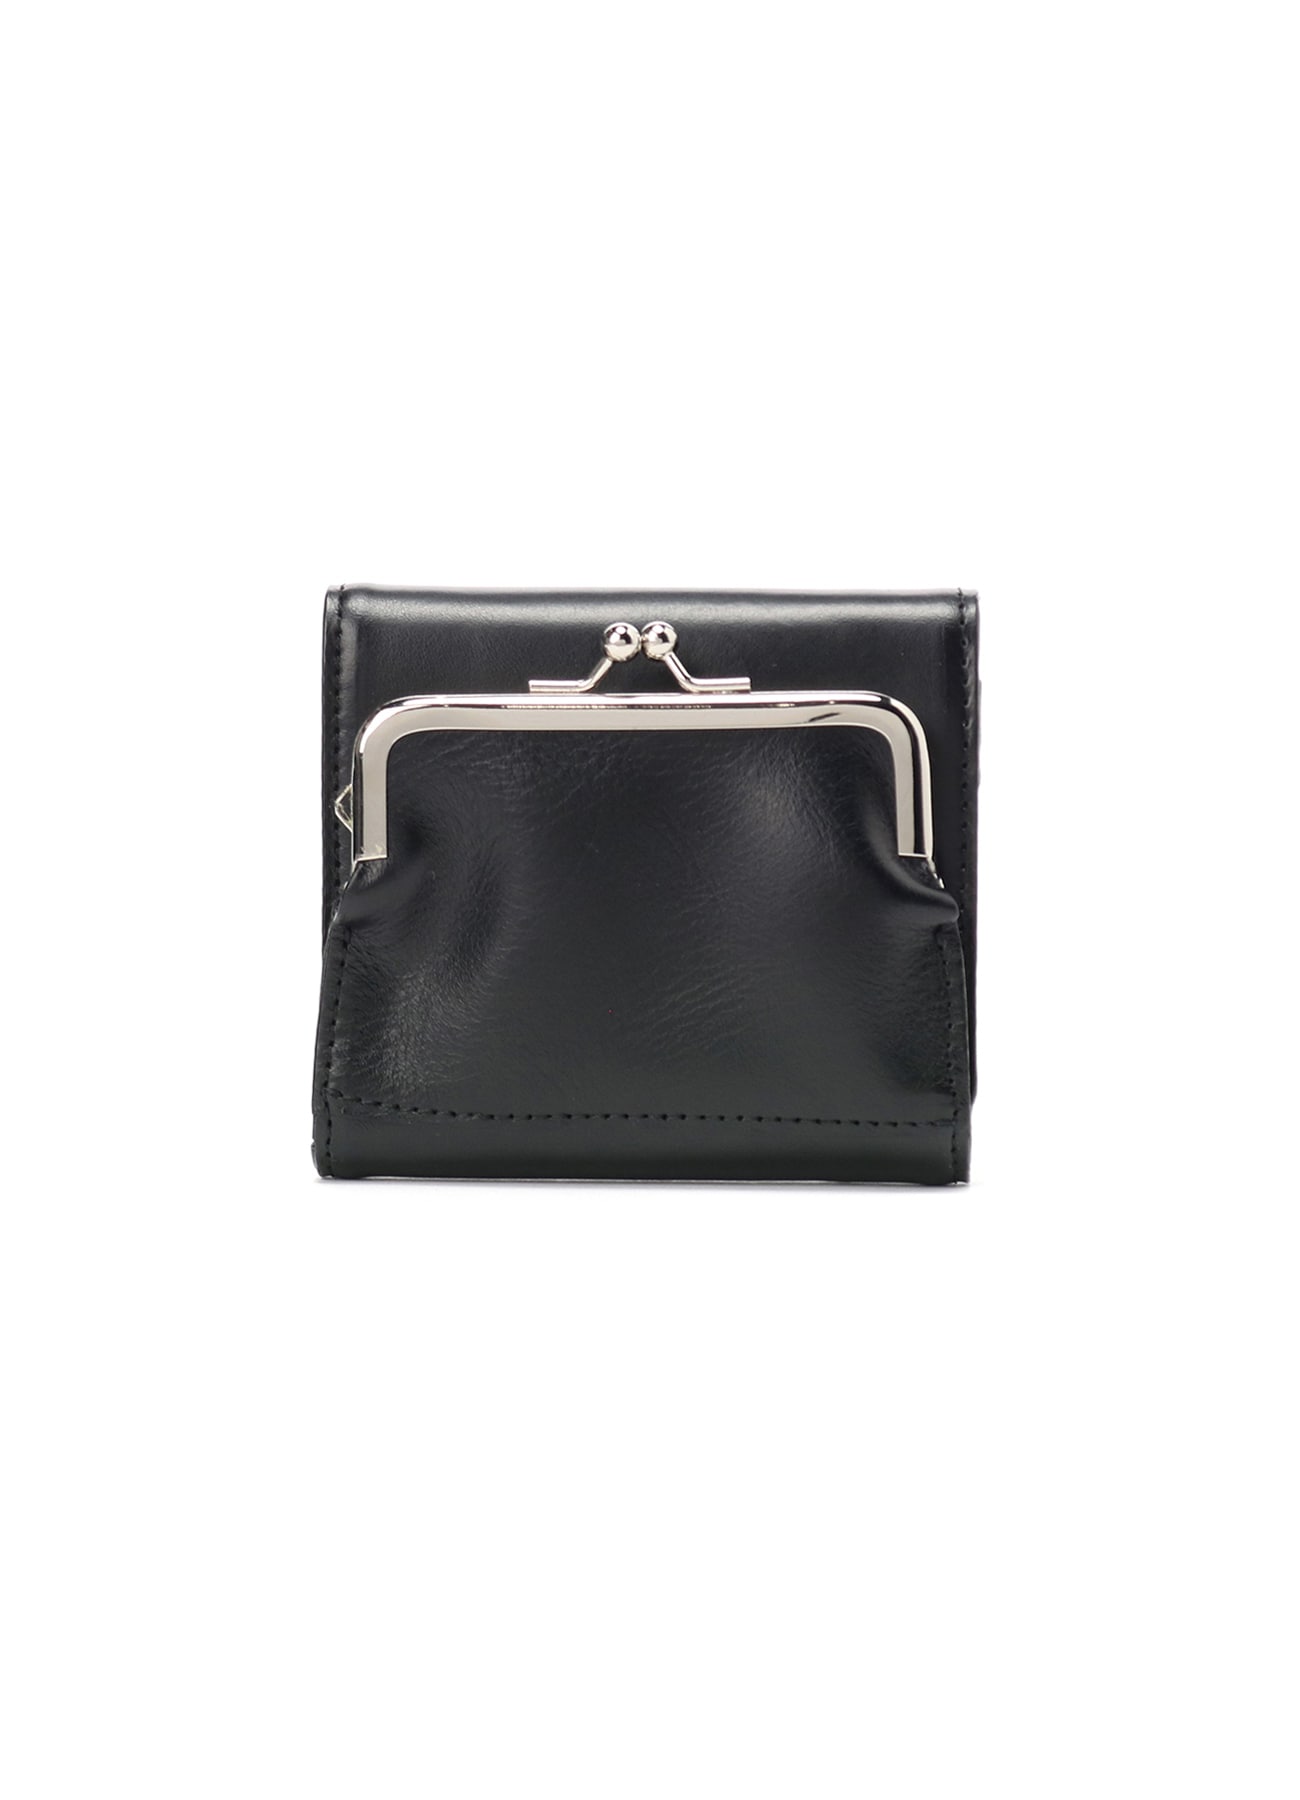 SMOOTH LEATHER MINI FOLDED CLAPS WALLET